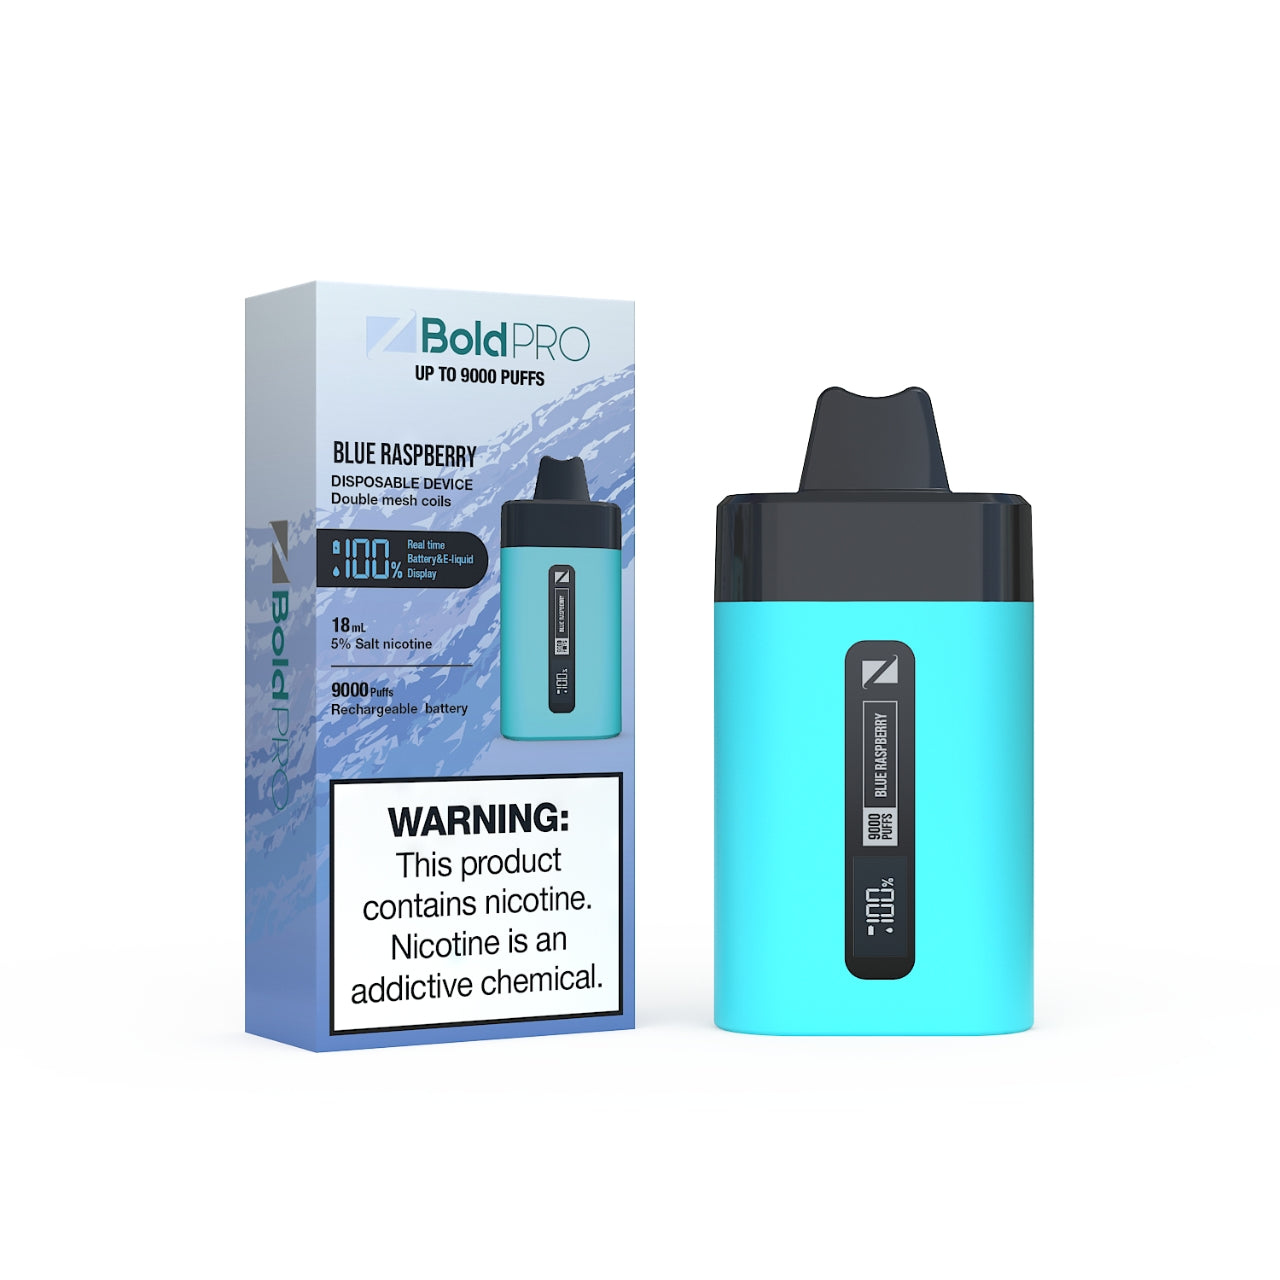 Z Bold Pro - Blue Raspberry - 9000 Puffs - LED Screen with Juice and Battery Indicator